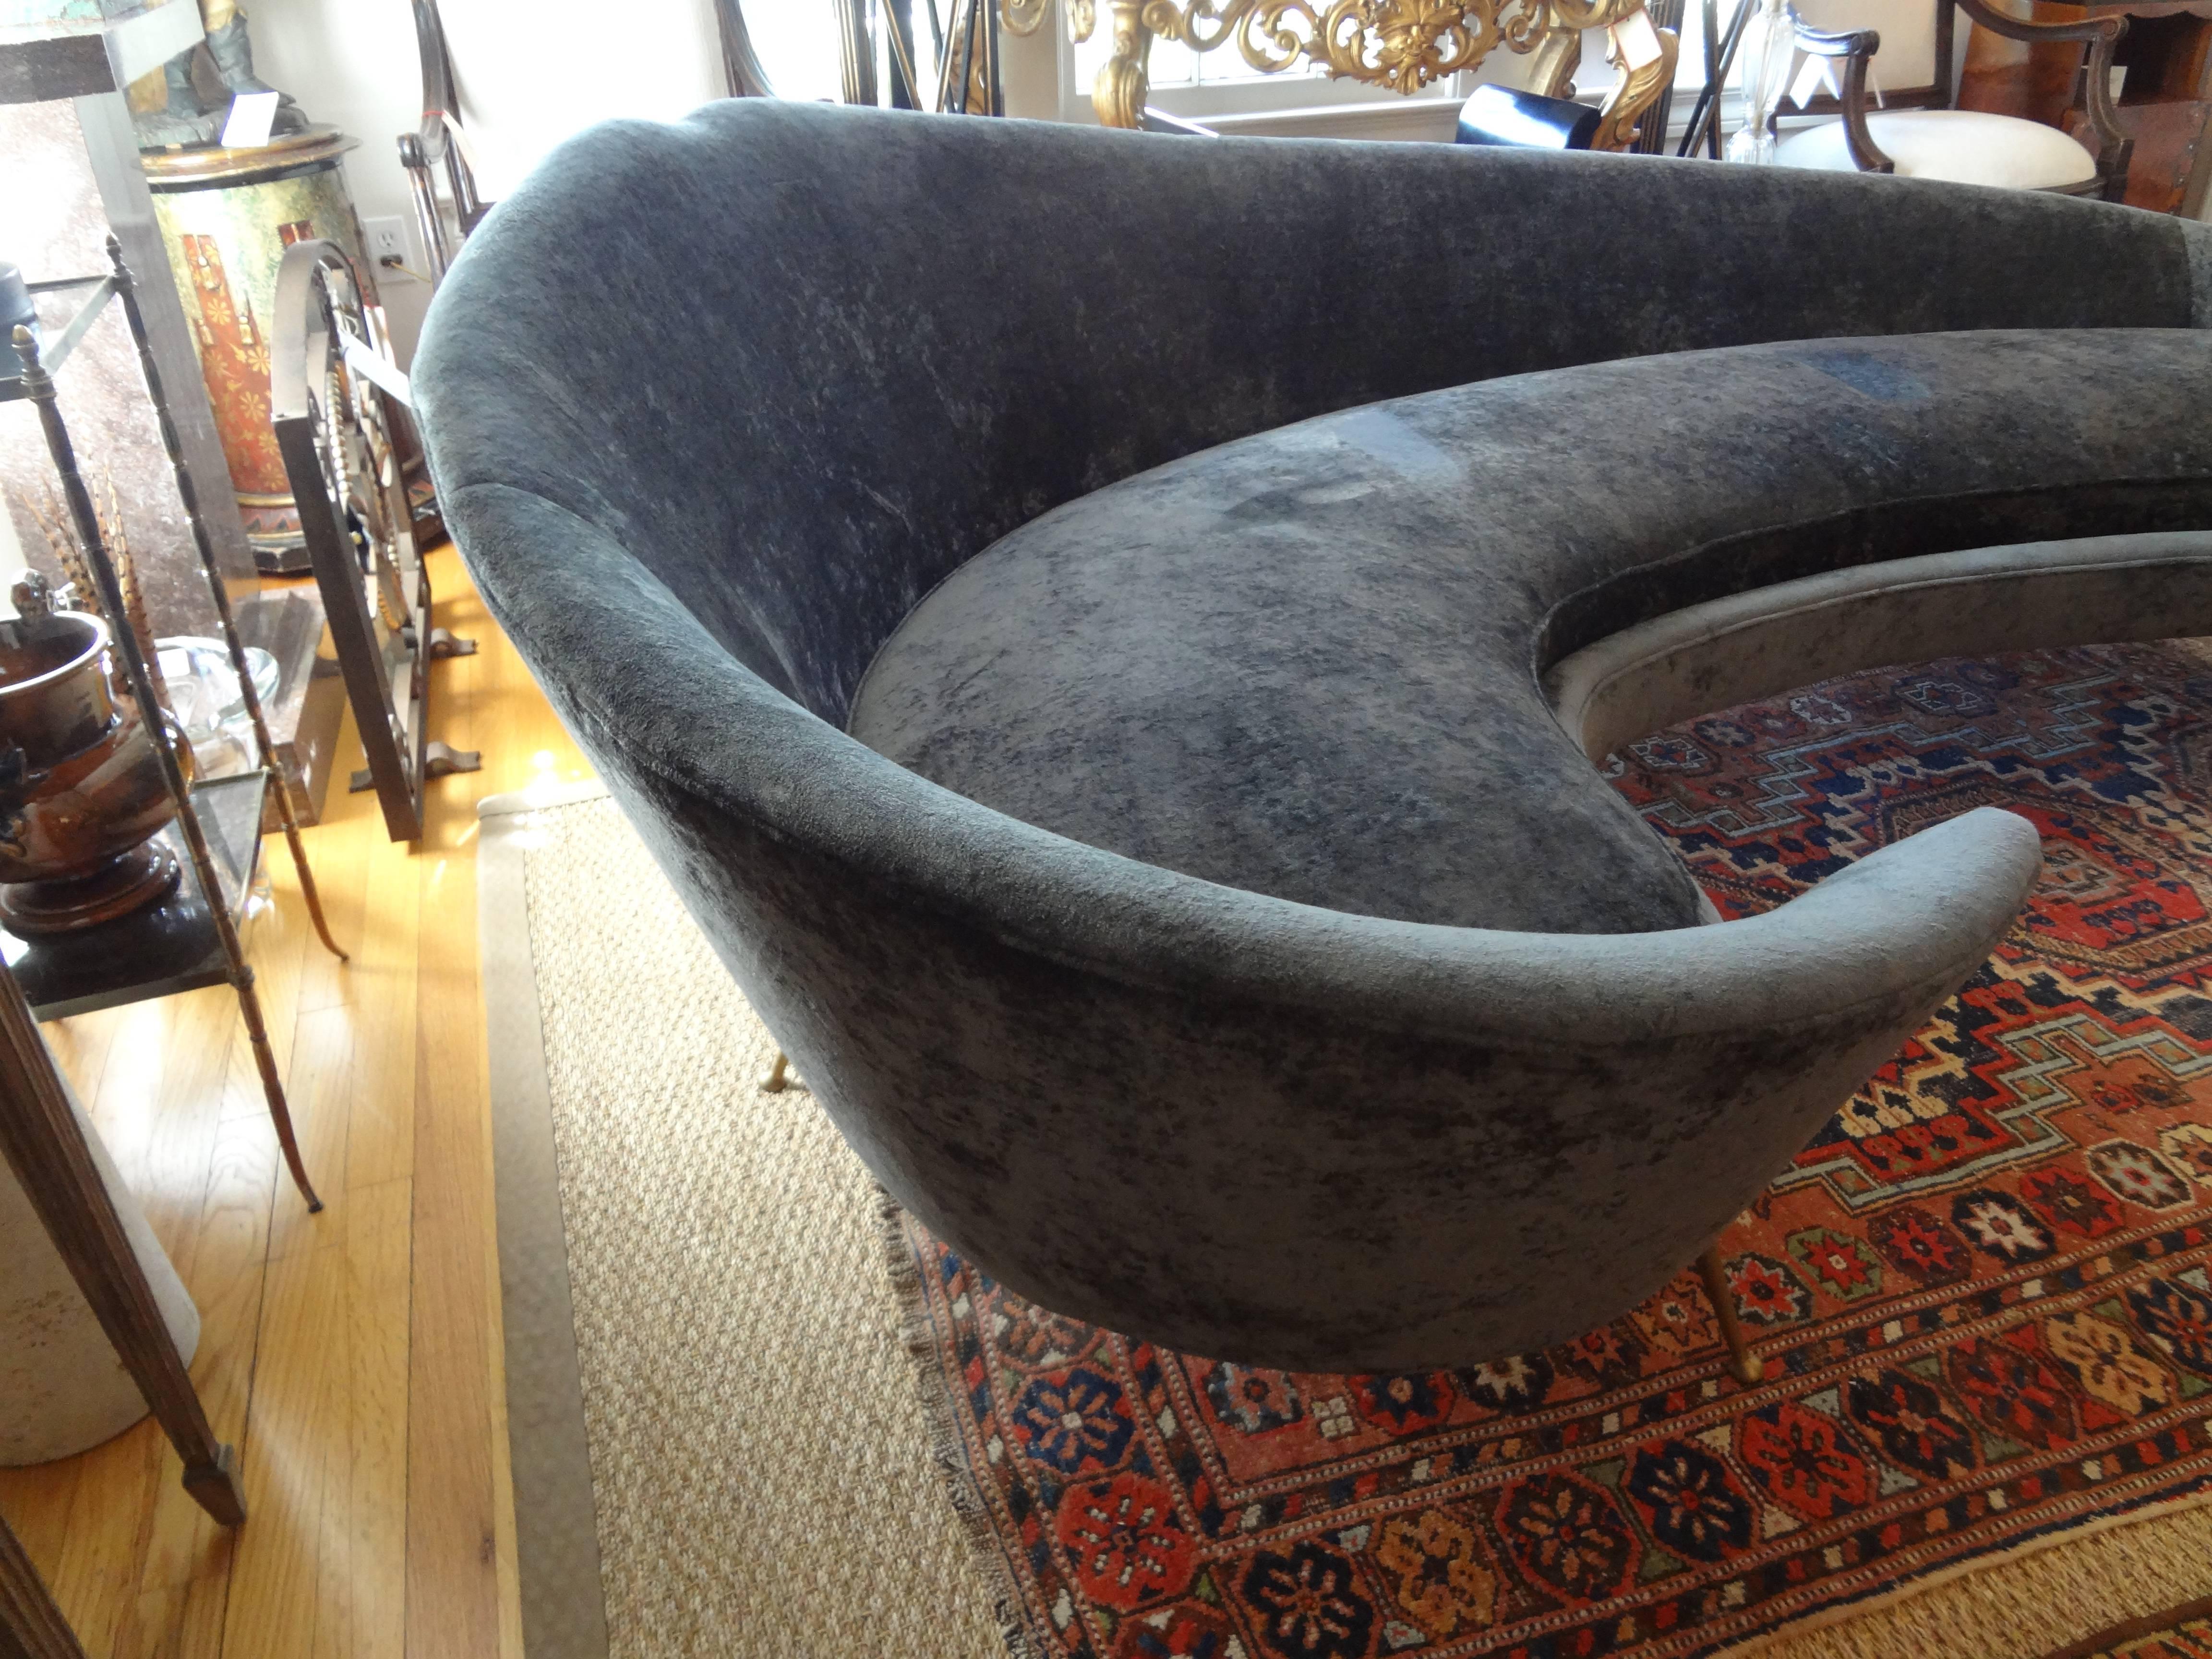 Gorgeous Italian midcentury curved sofa with splayed brass legs attributed to Federico Munari, circa 1960.
Currently upholstered in grey velvet.
The fabulous sculptural sofa is similar to works by artists of the same era in Italy, such as Gio